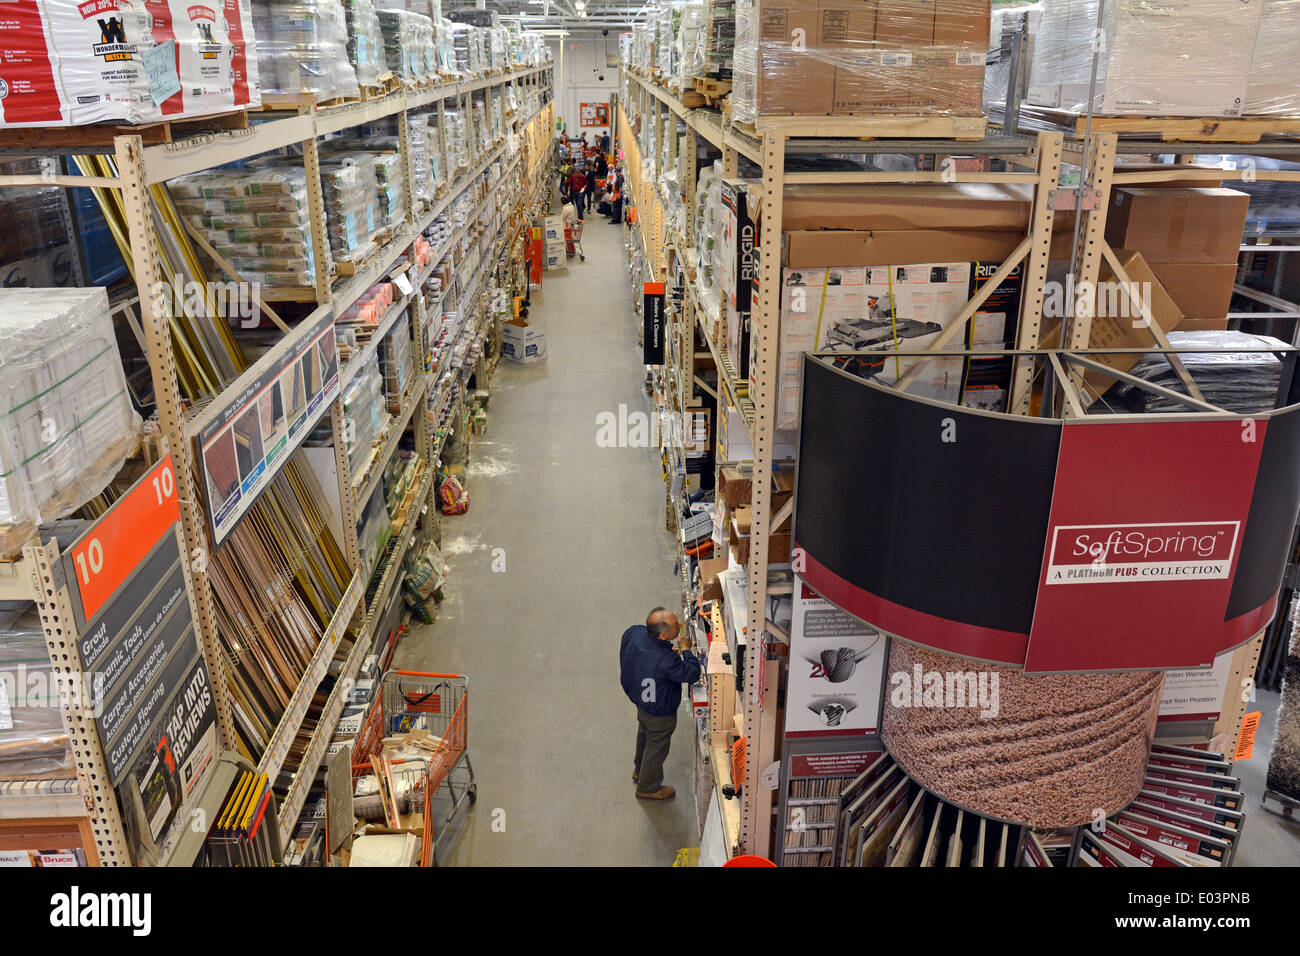 View Down An Aisle At Hone Depot Store In Jericho Long Island New York Stock Photo Alamy